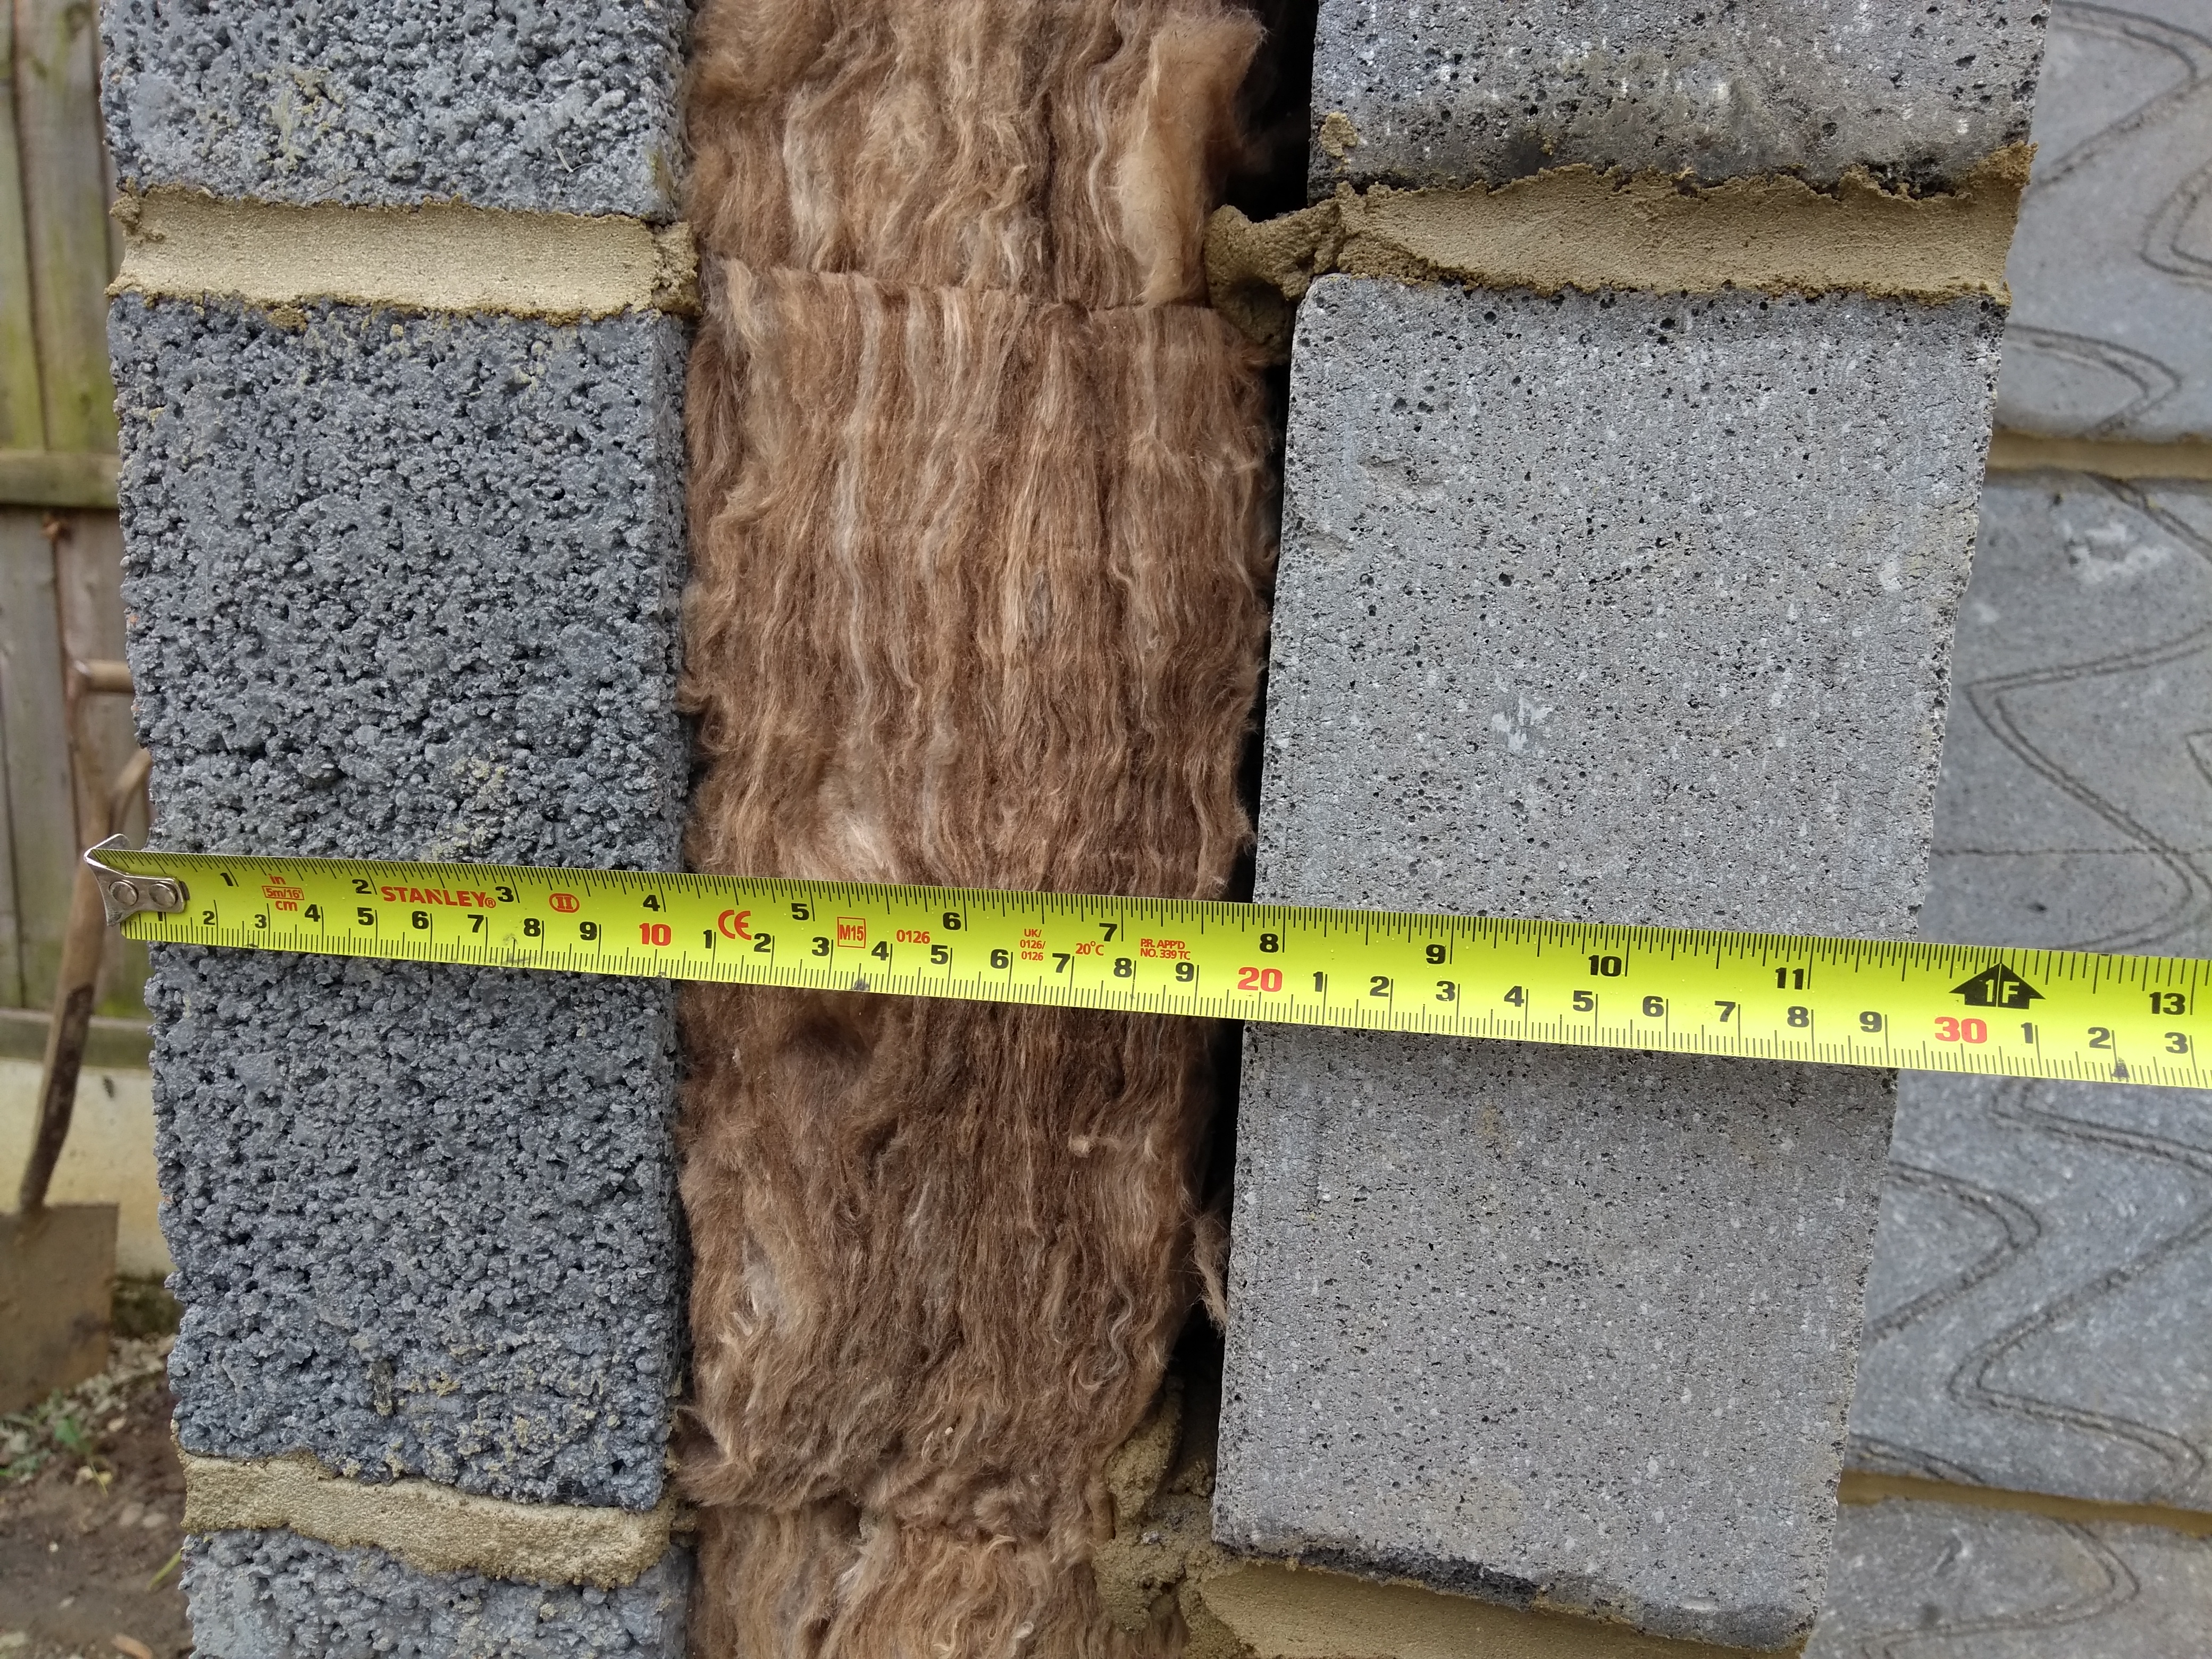 How deep is the cavity insulation? It's 10cm deep and Earthwool